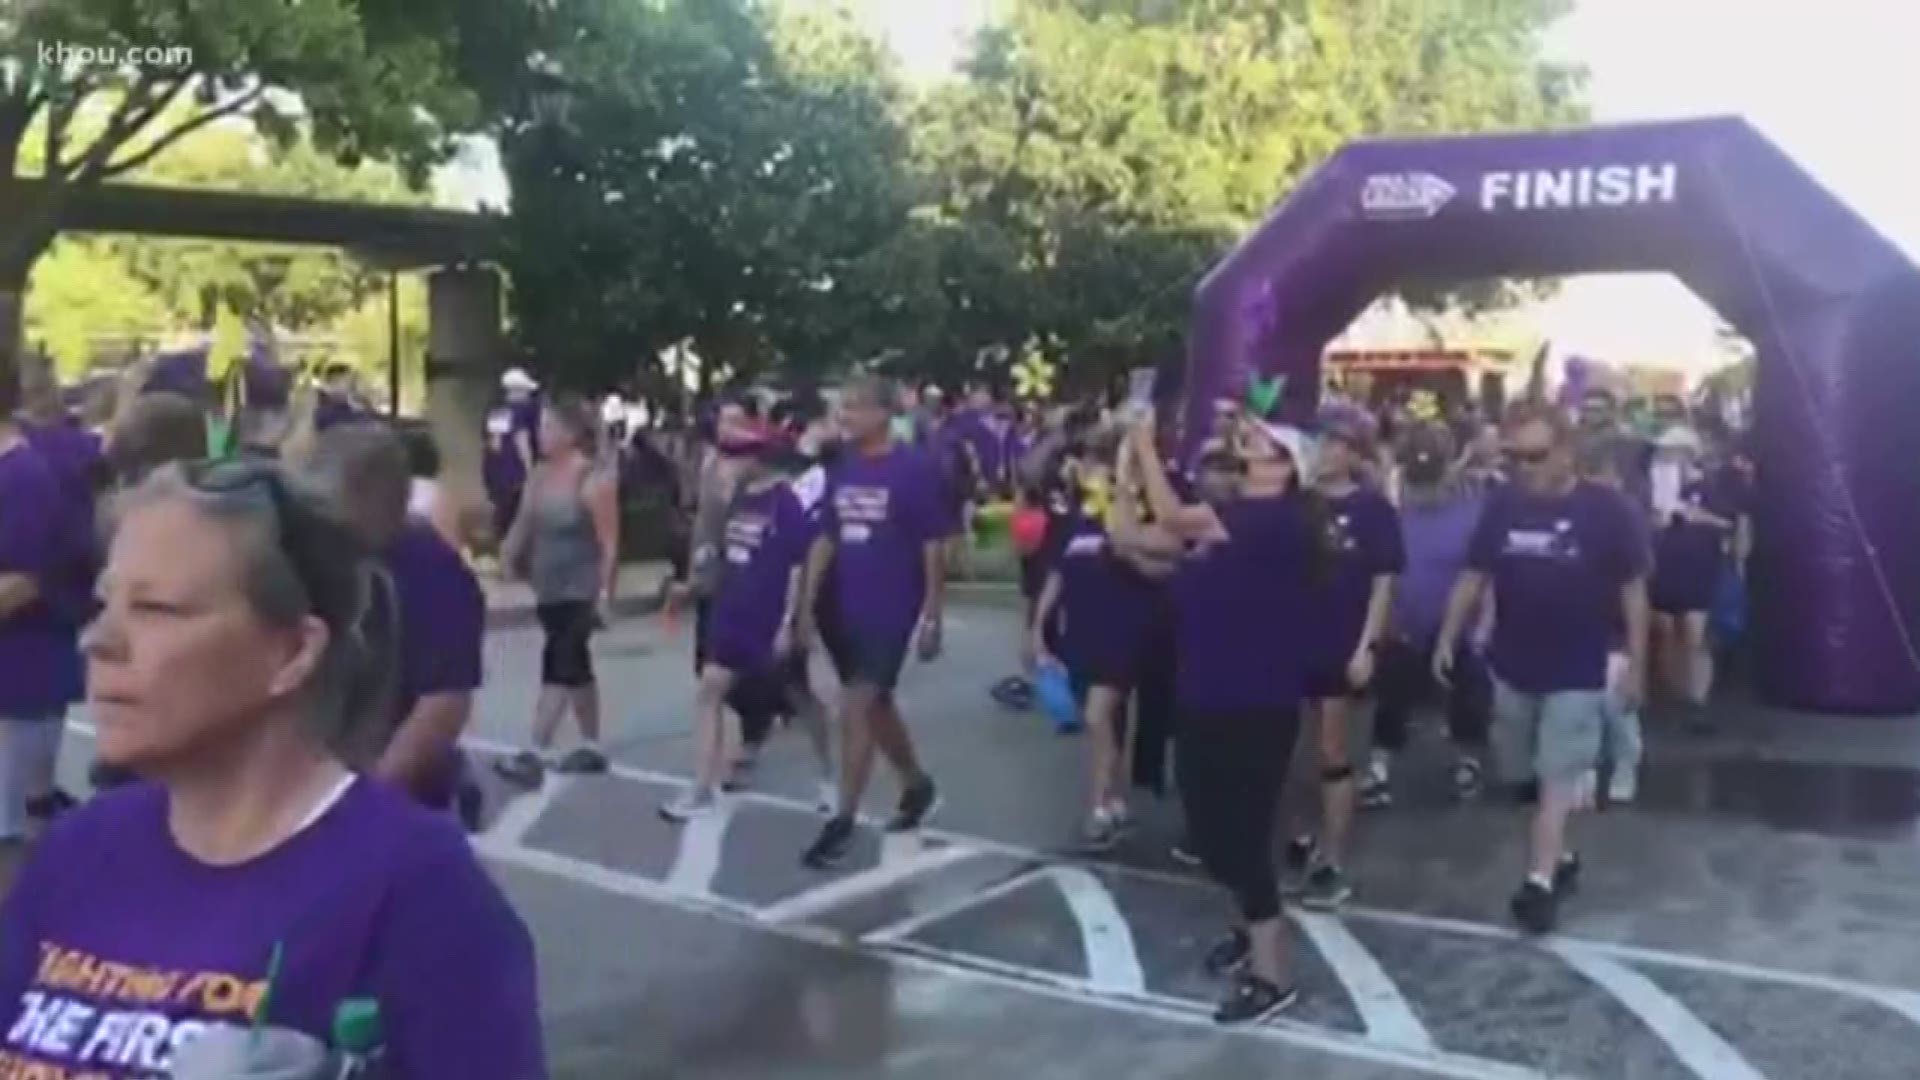 The Walk to End Alzheimer's in Cinco Ranch raised money for research and awareness for the disease that affects more than 380,000 Texans.